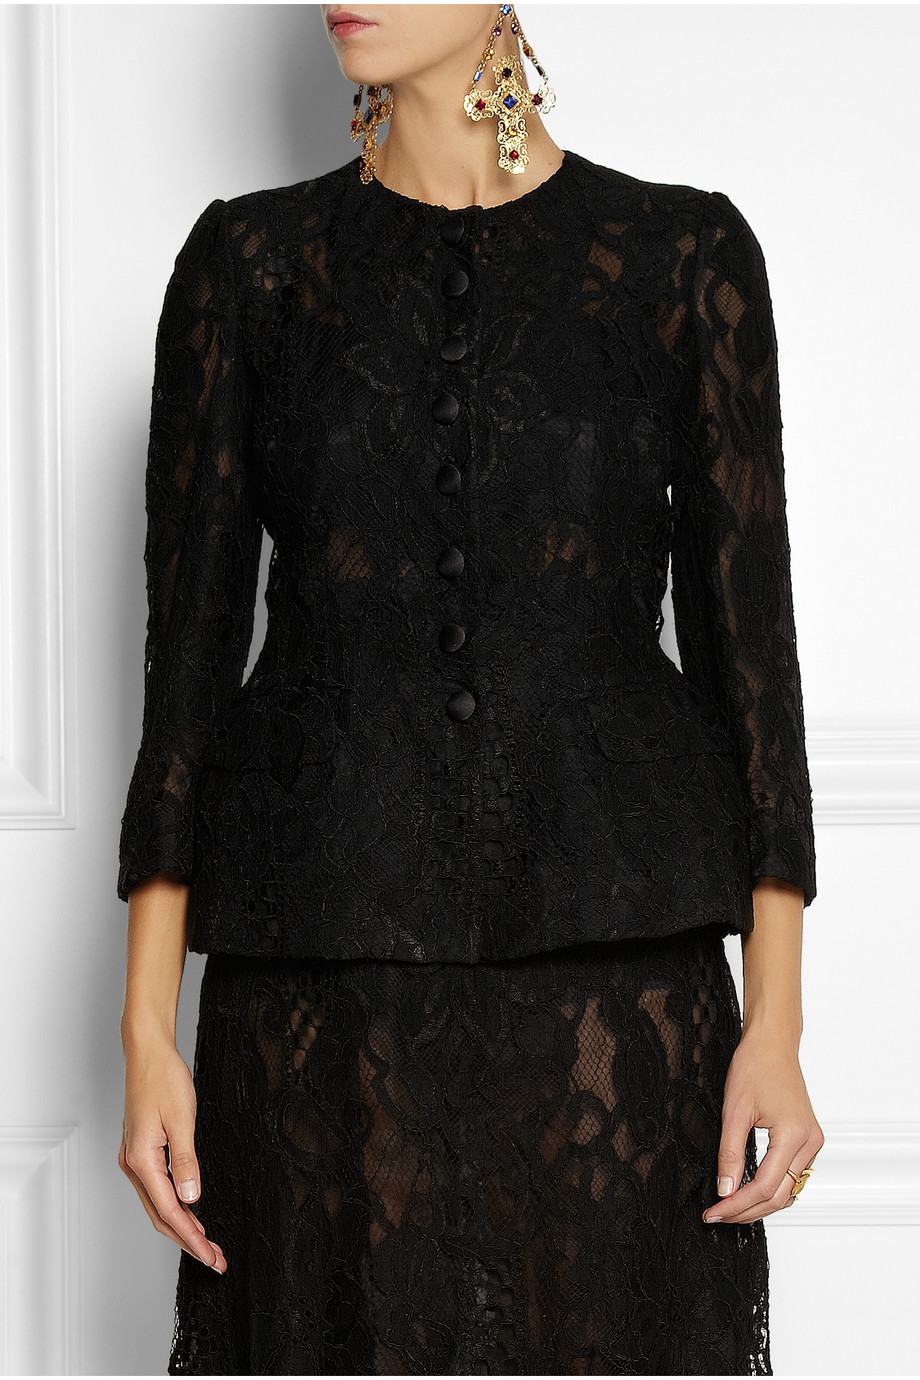 Dolce & gabbana Padded Florallace Jacket in Black | Lyst